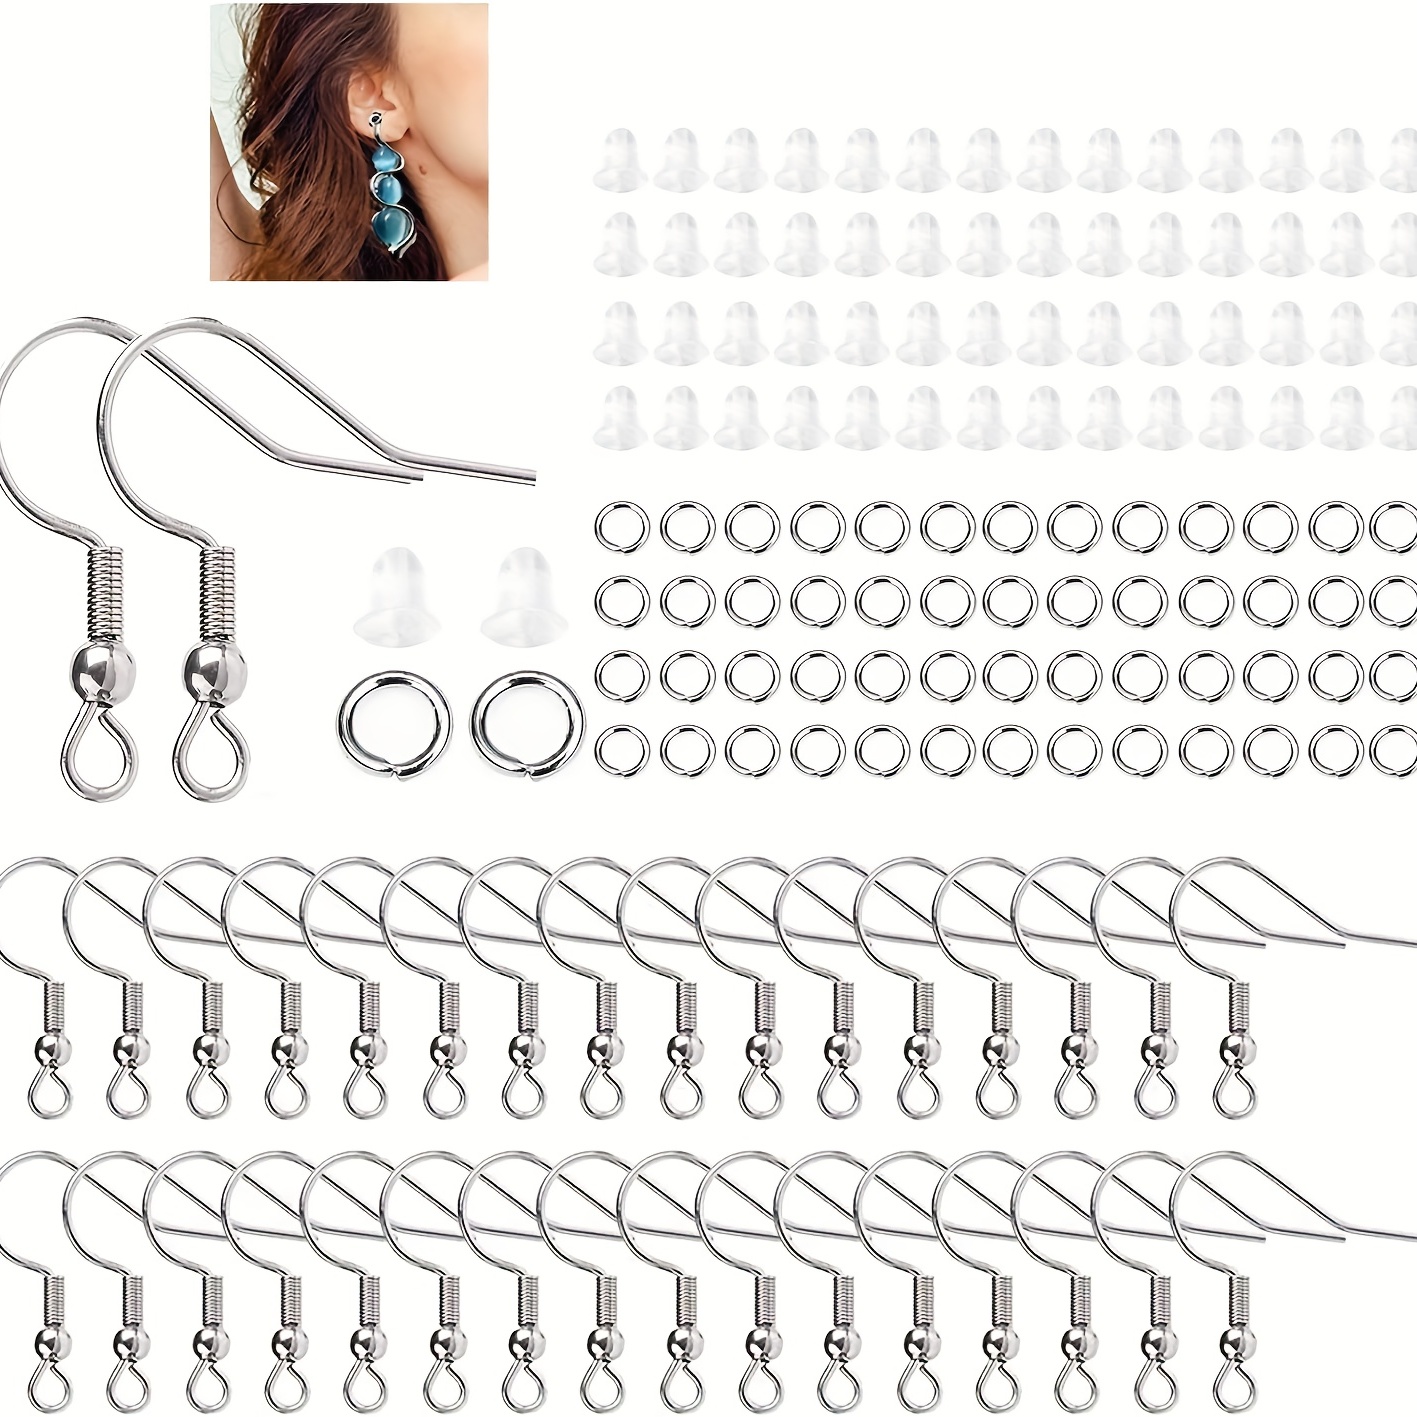  200PCS Hypoallergenic Bead & Spring Surgical Stainless Steel  Earring Hooks With 200pcs Earring backs For Jewelry Making DIY (Golden).